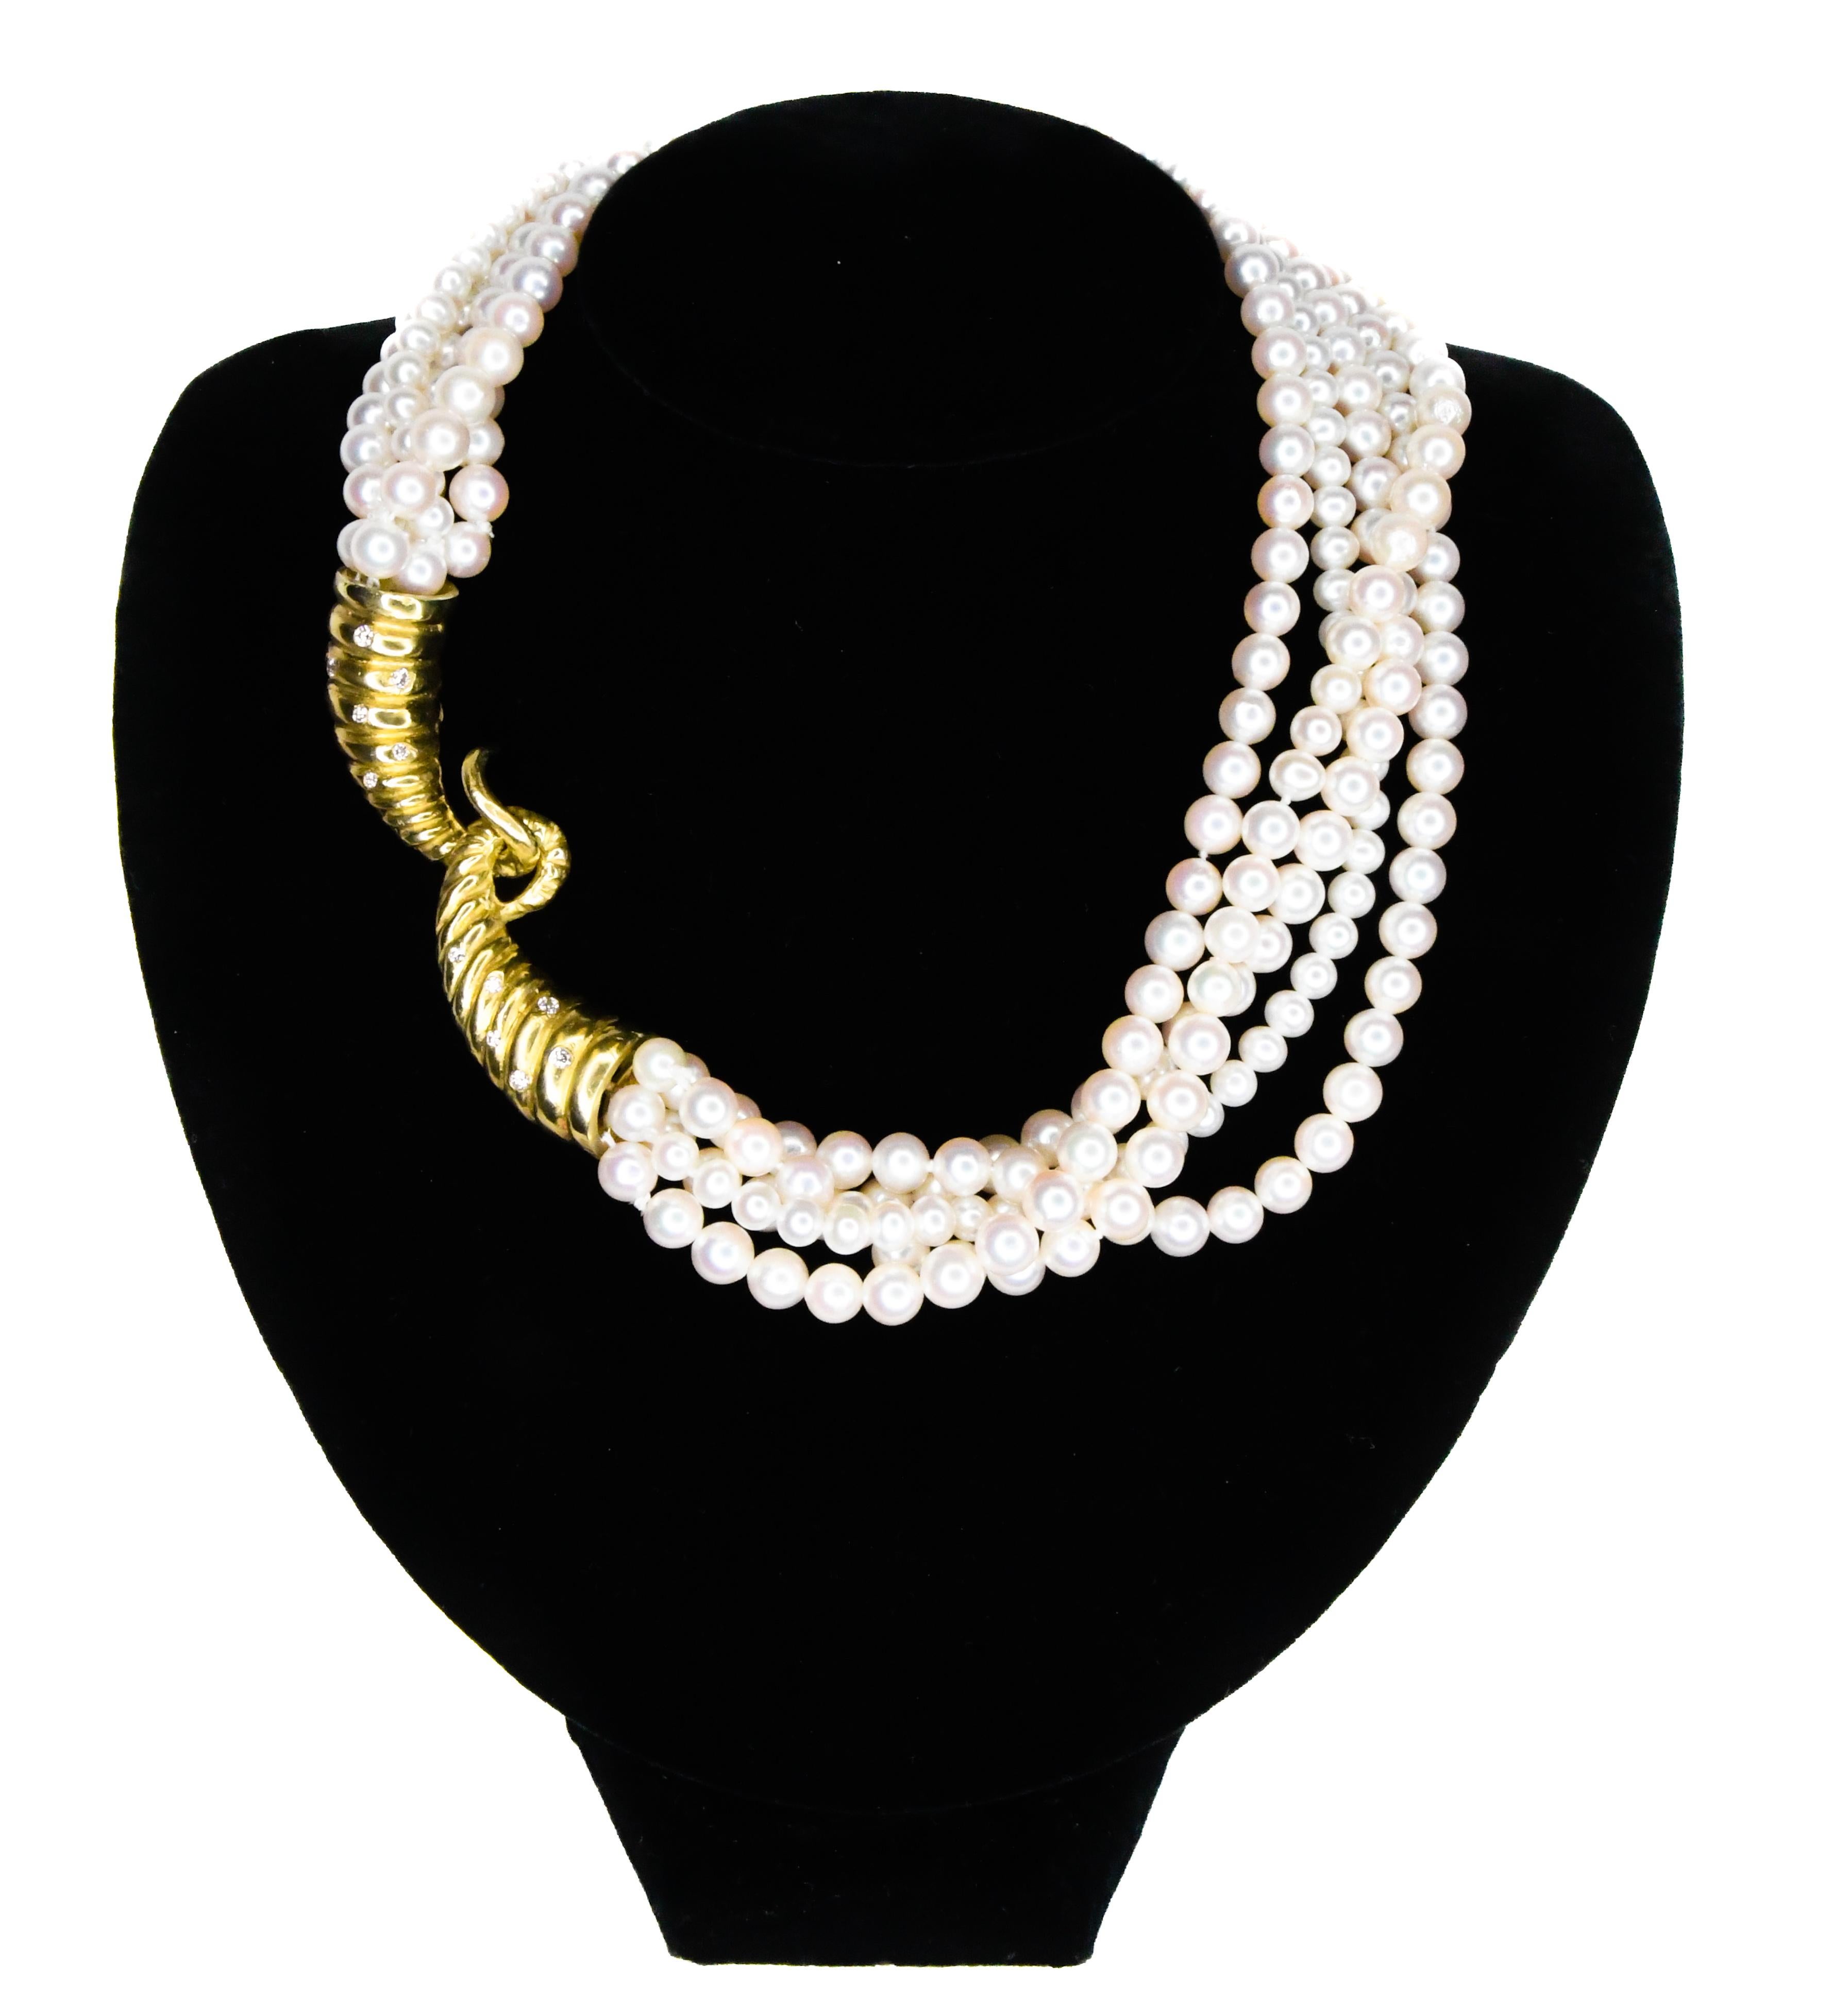 Julia Boss handcrafted multistrand pearl choker necklace is sure to become a coveted heirloom!  Necklace features 5 strands of precious pearls gathered and held together by a 